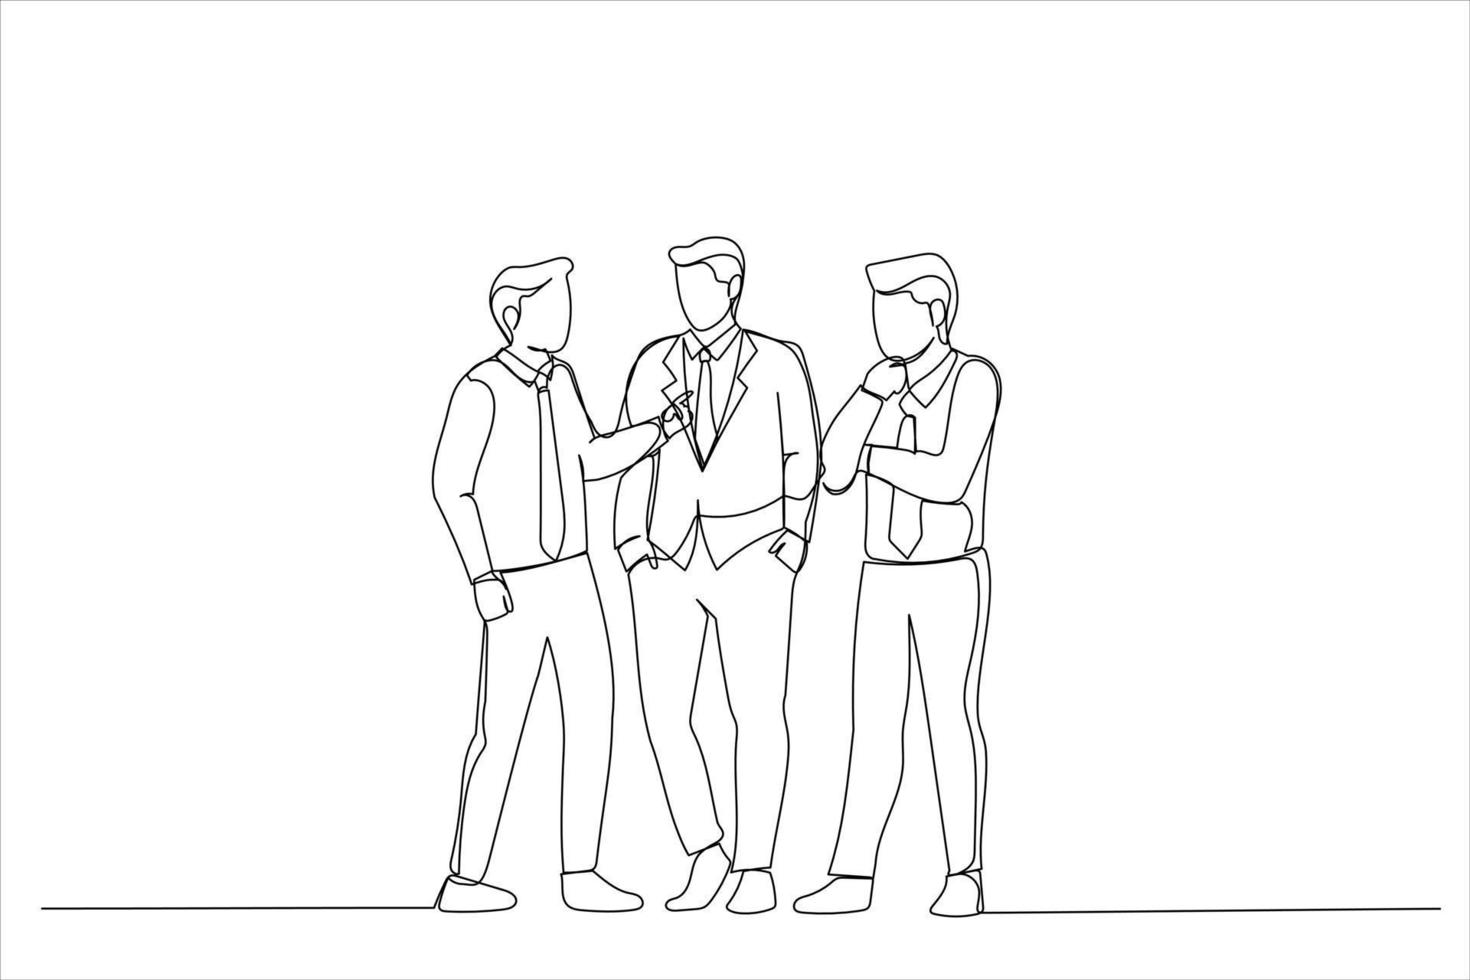 Drawing of business people in formalwear discussing something and gesturing. Single line art style vector